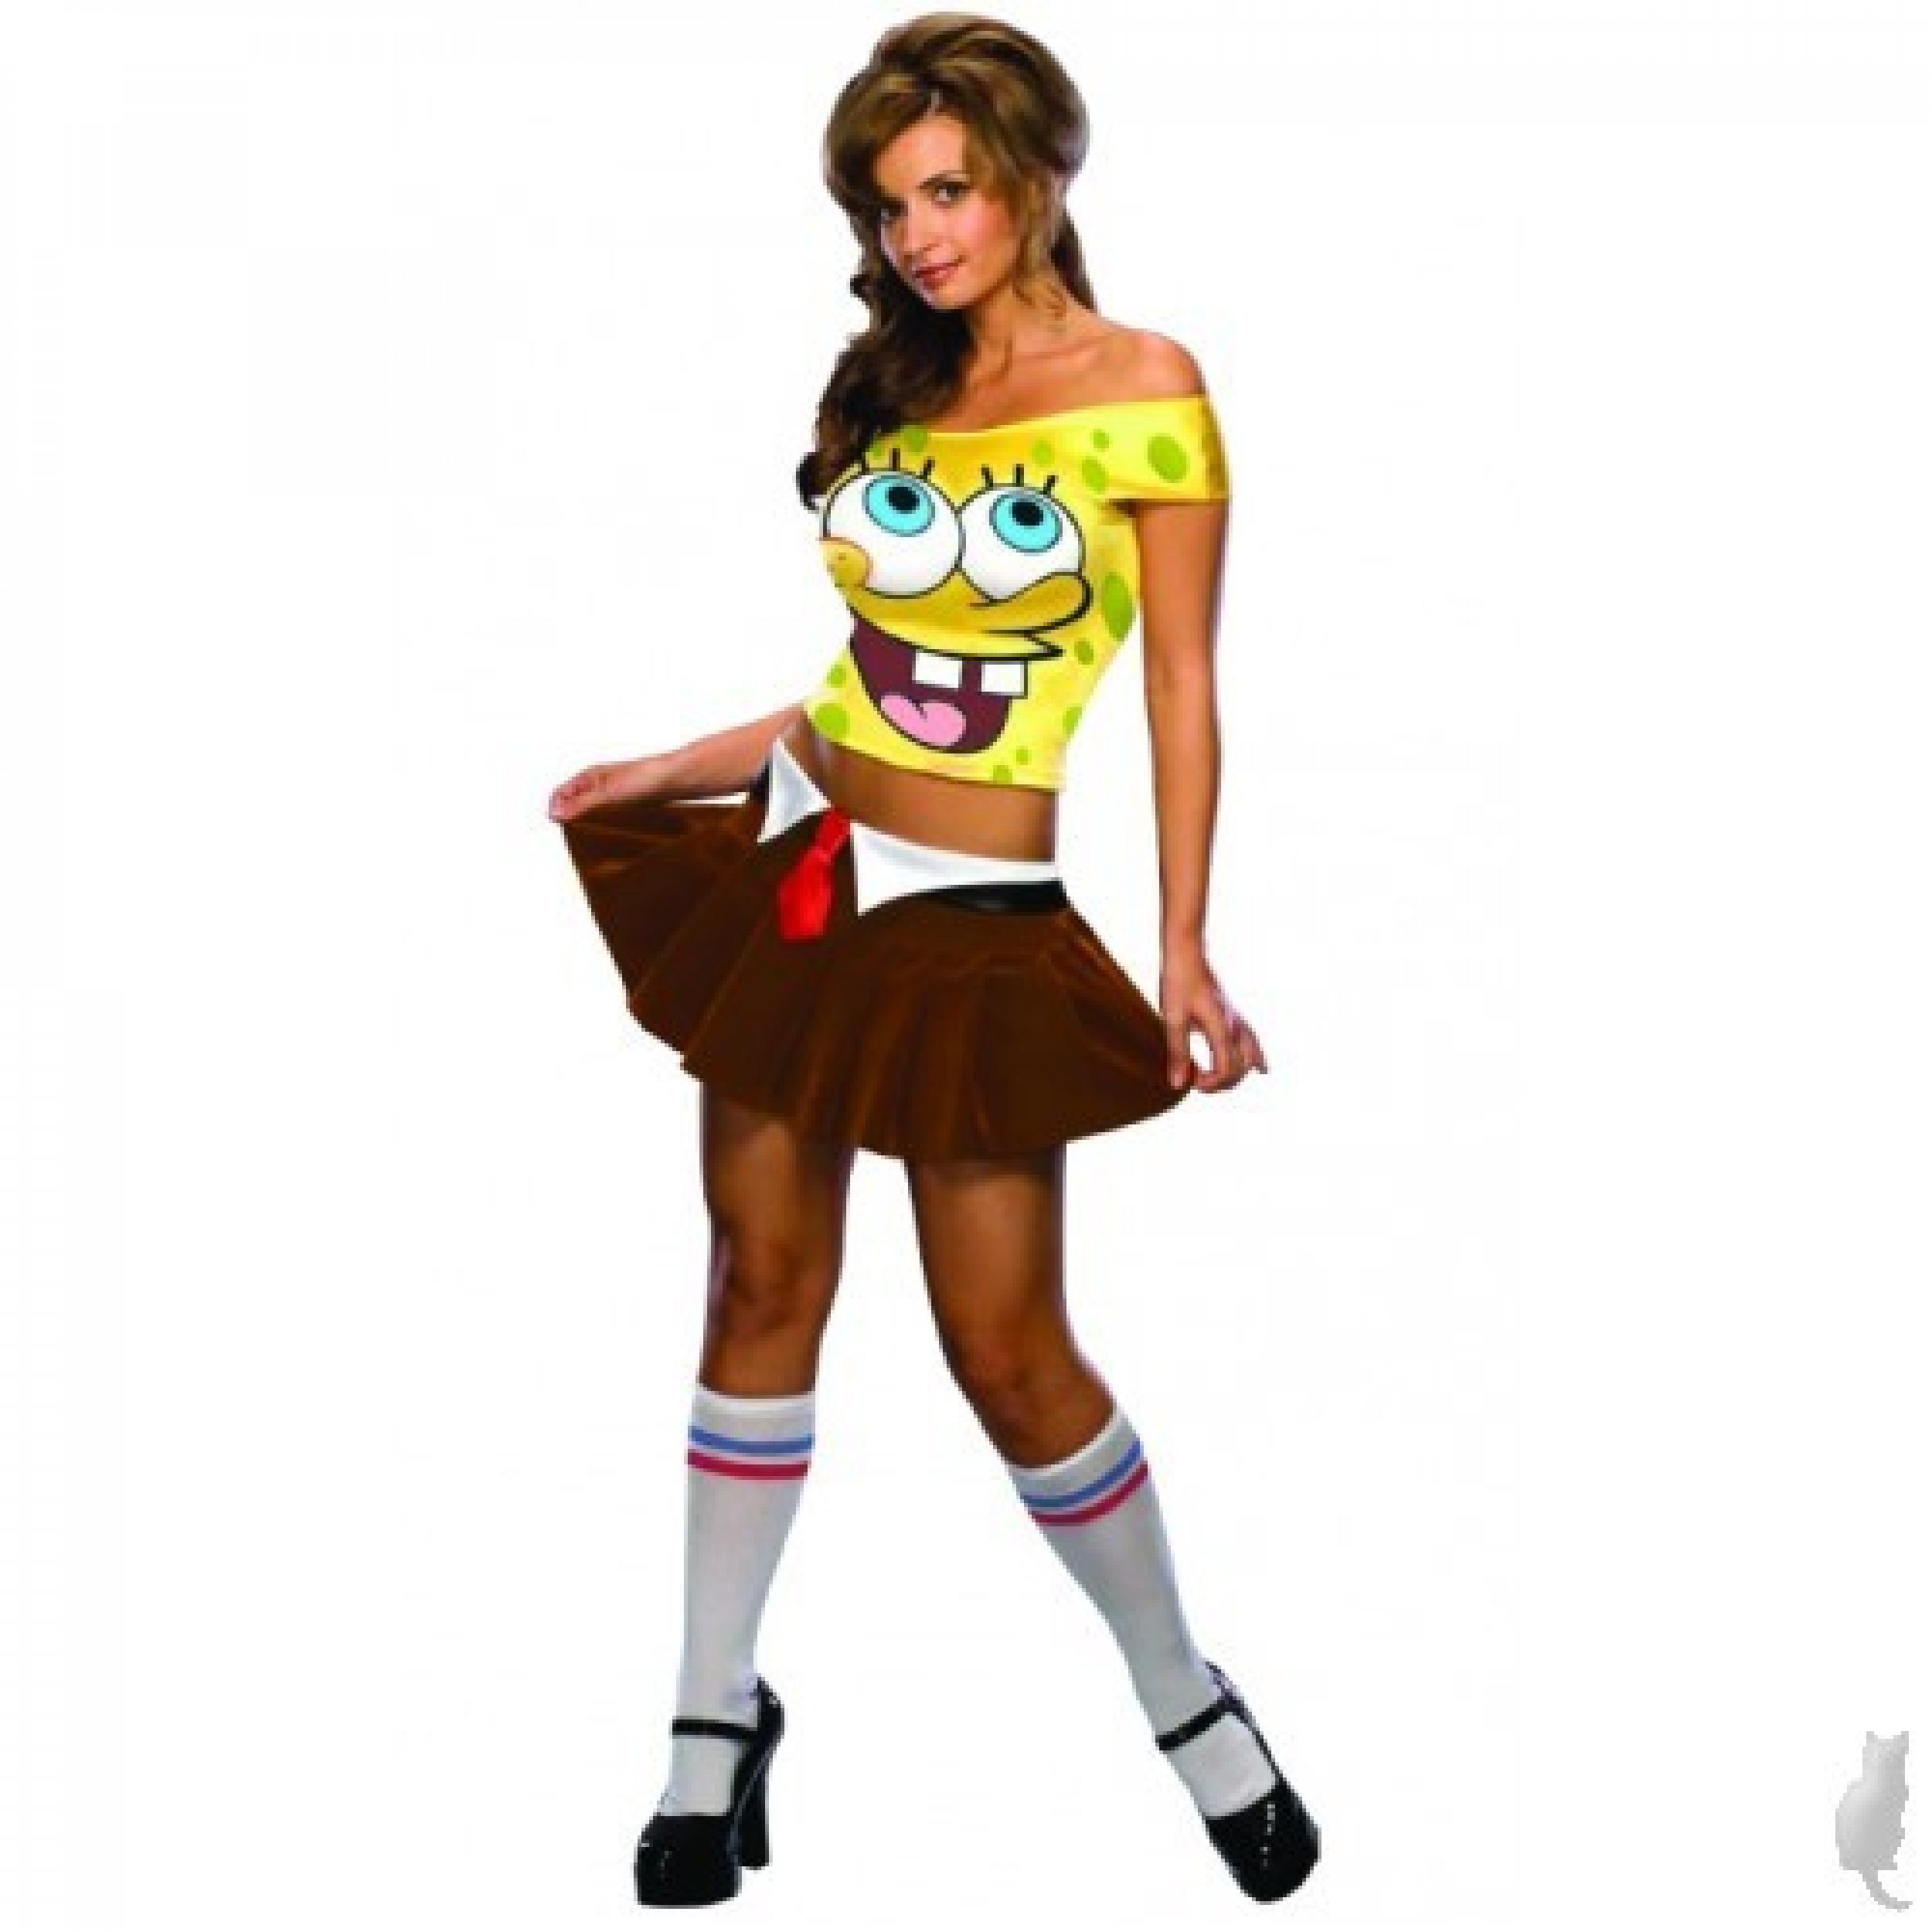 Halloween Costume Ideas 2011: 10 'Sexy' Costumes (That Really Aren't ...